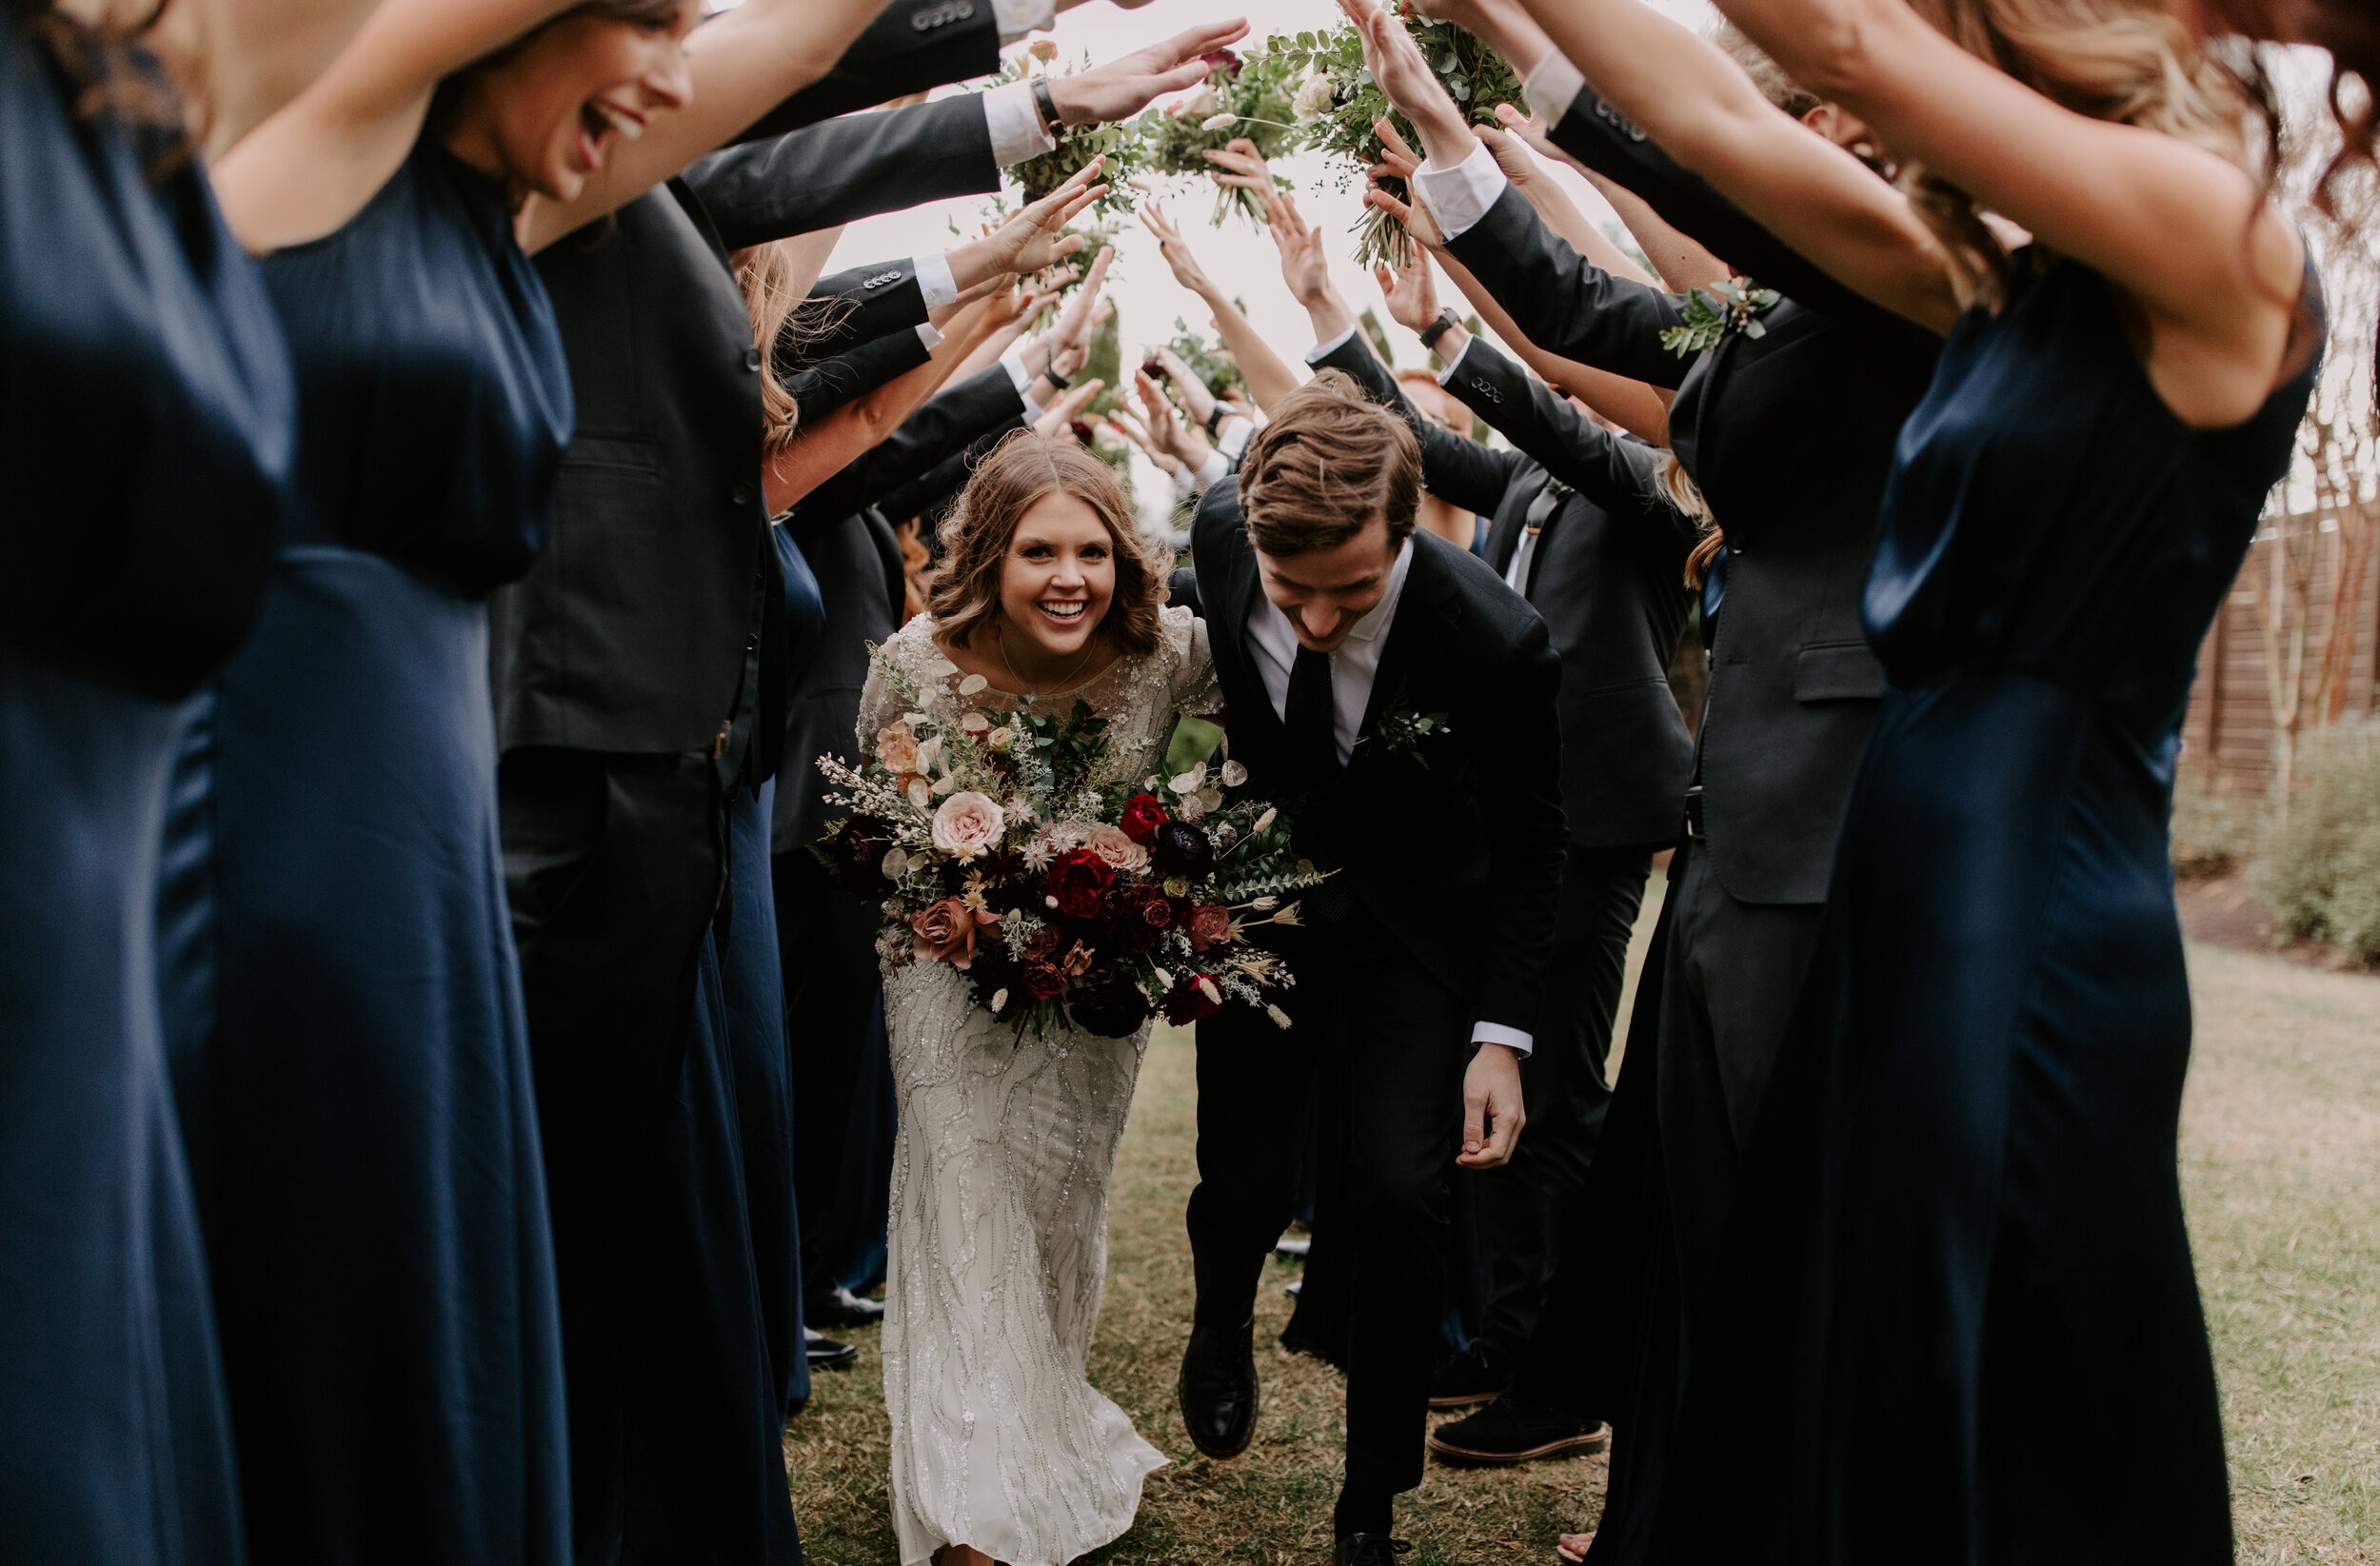 Navy silk bridesmaid dresses with jewel tone flowers with airy, natural greenery. Nashville wedding florist at the Cordelle.